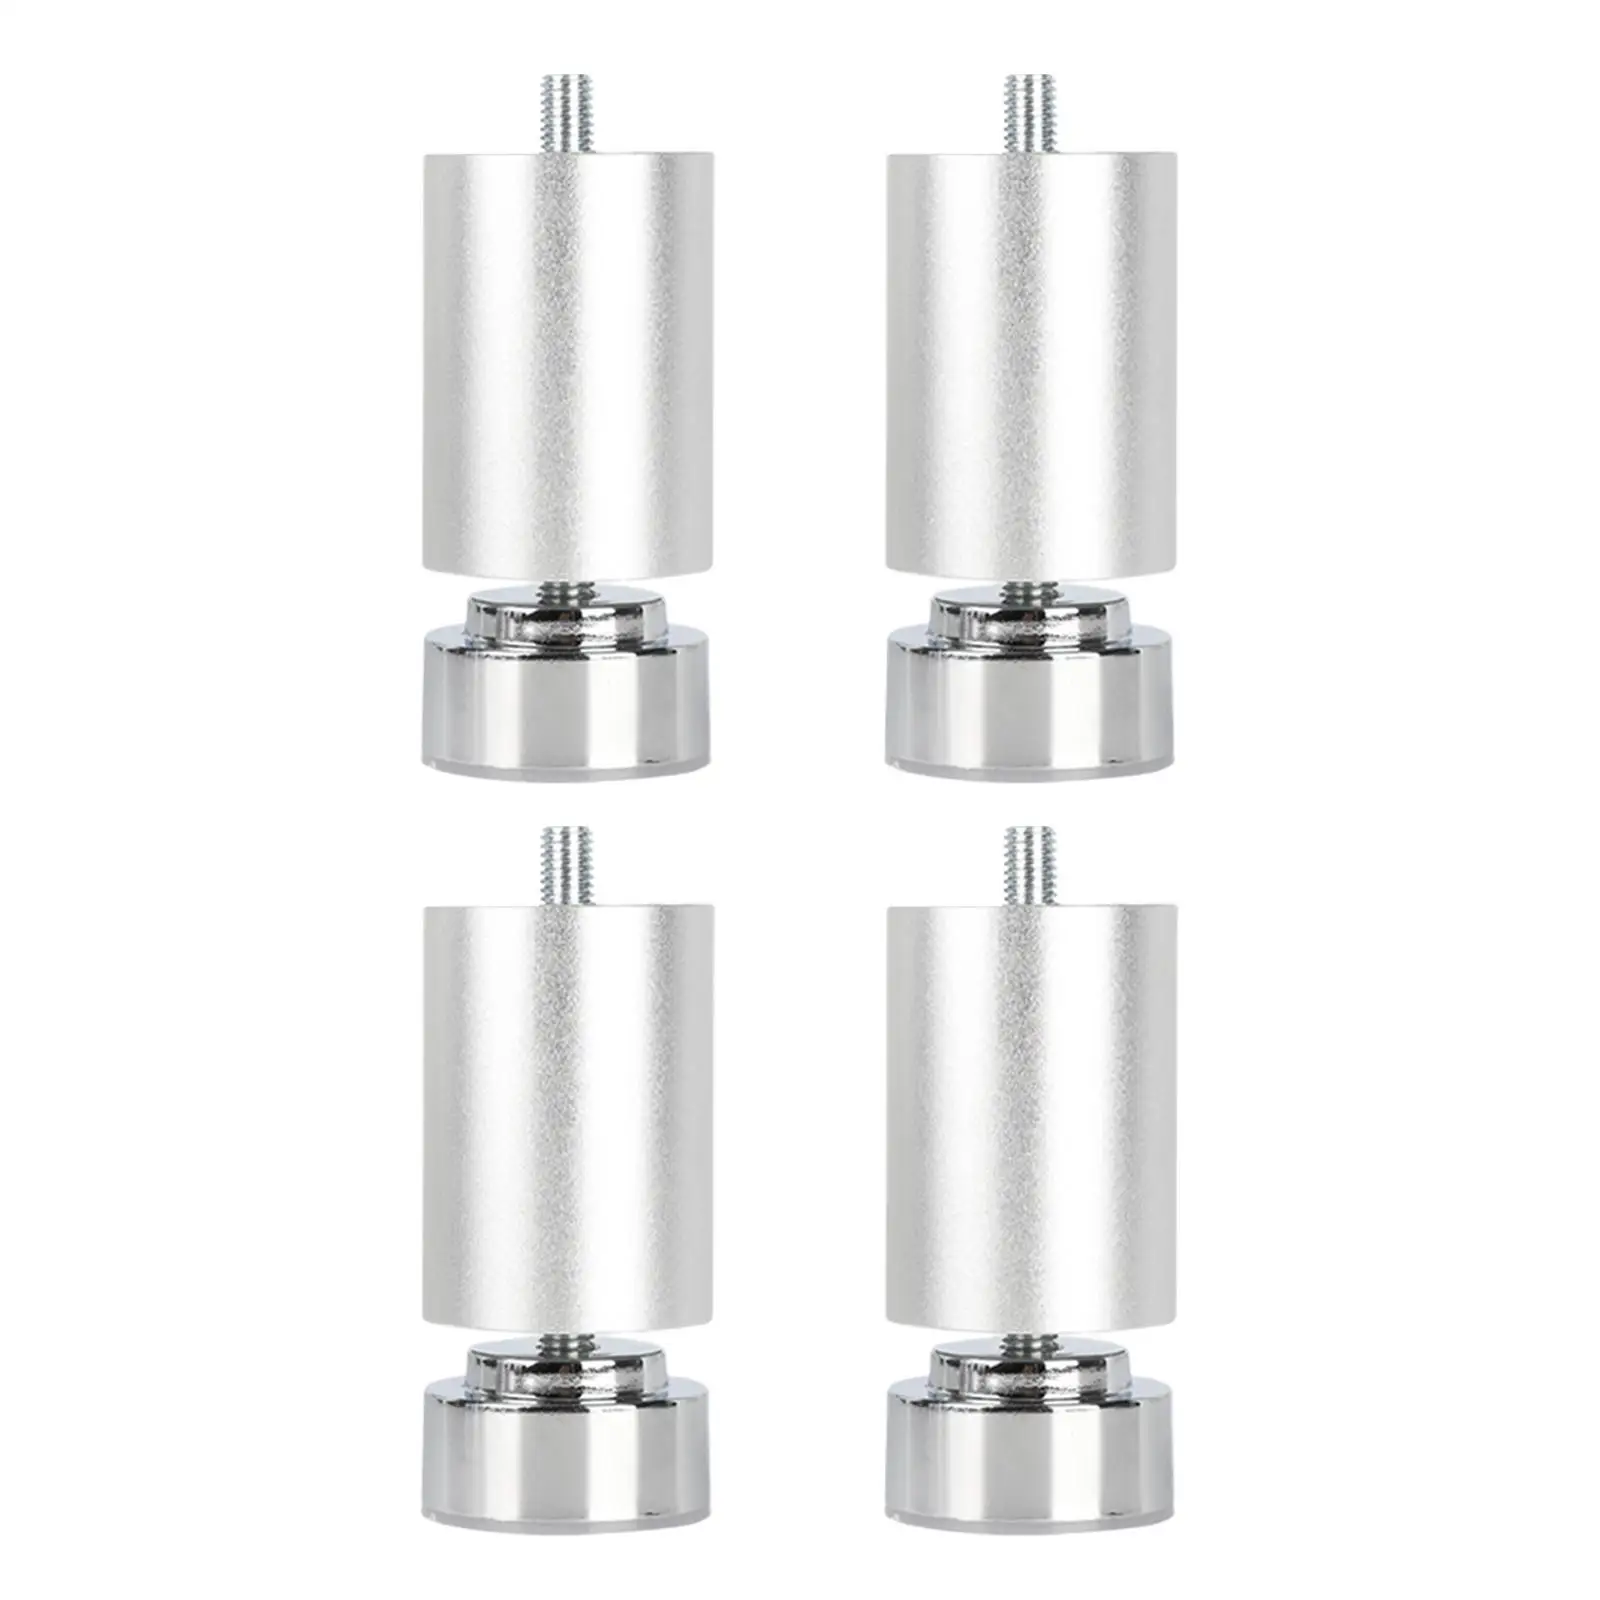 4Pcs Furniture Support Legs Alloy Professional Heavy Duty Sofa Legs Table Feet M10 for Bathroom Beds Cafe Kitchen Dining Table